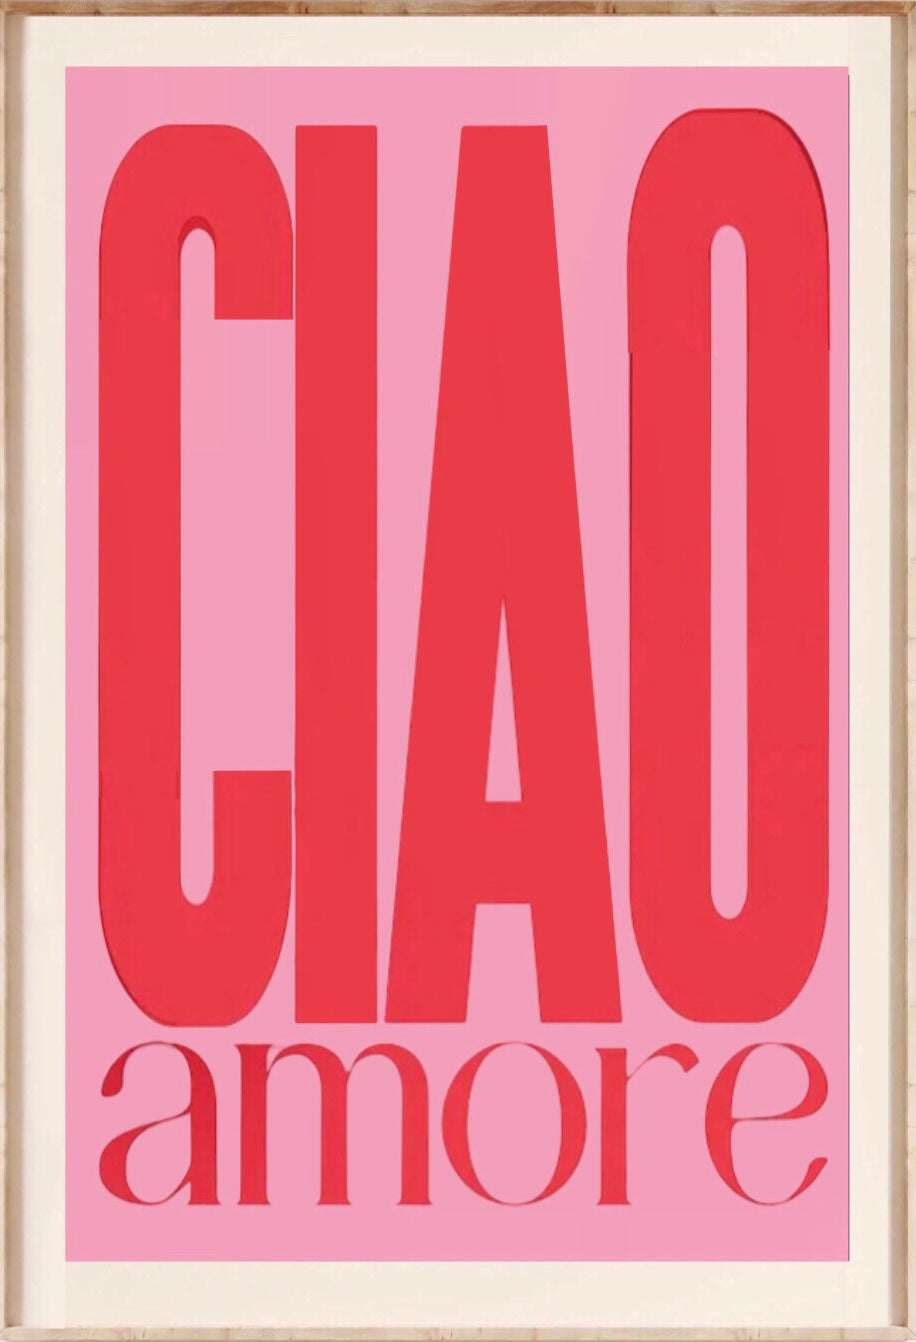 " ciao amore " poster